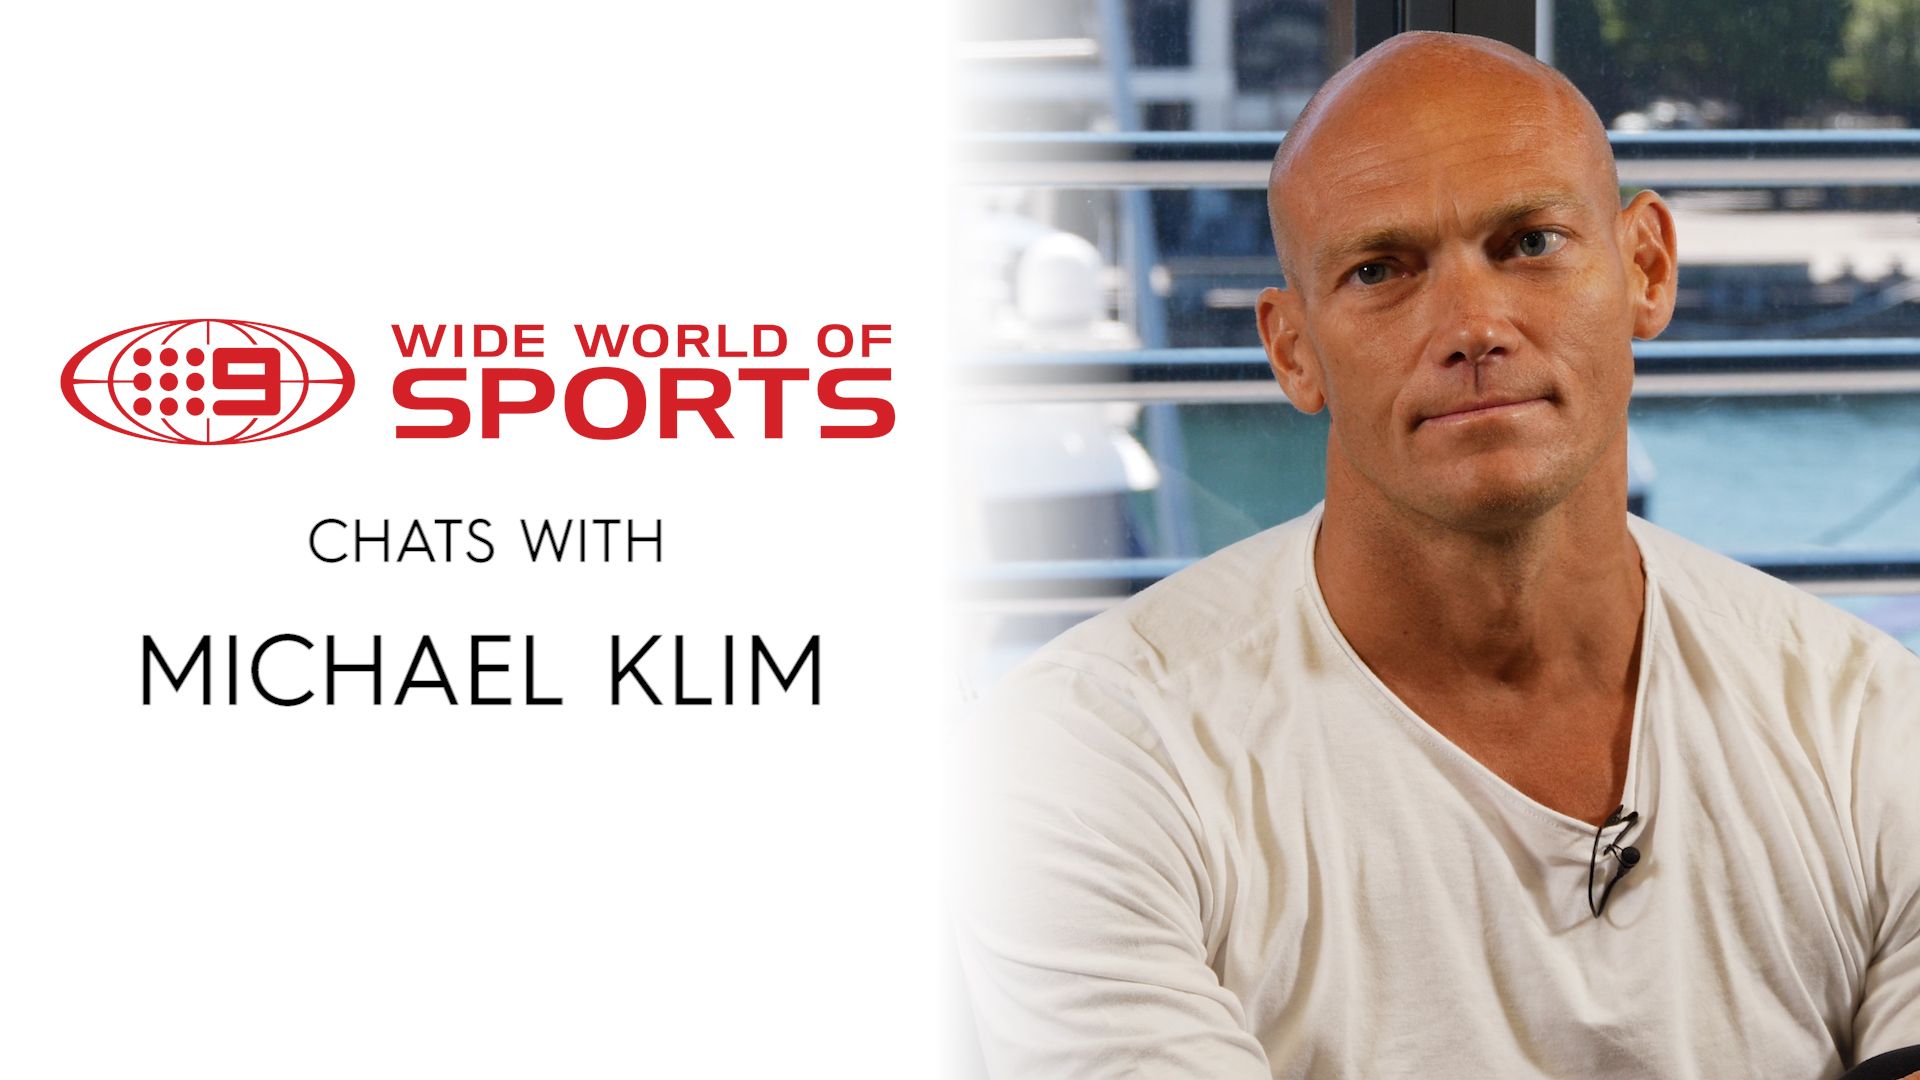 Wide World of Sports chats with Michael Klim